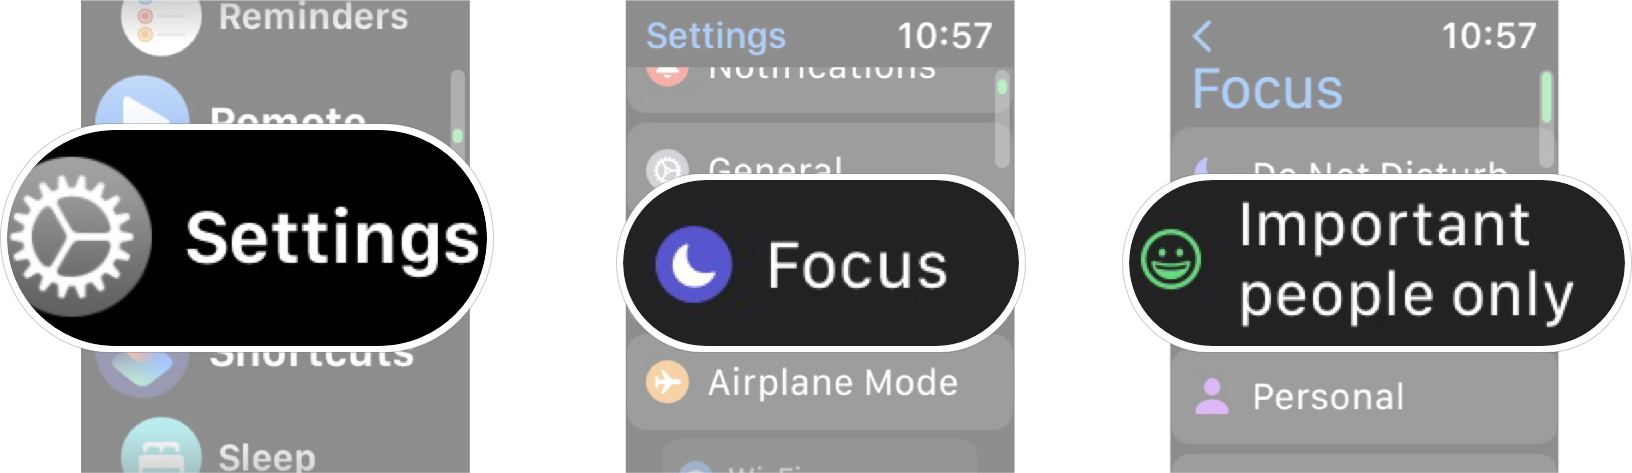 How To Create Custom Schedule For Focus In watchOS 8: Launch Settings, tap focus, and then tap the focus you want.